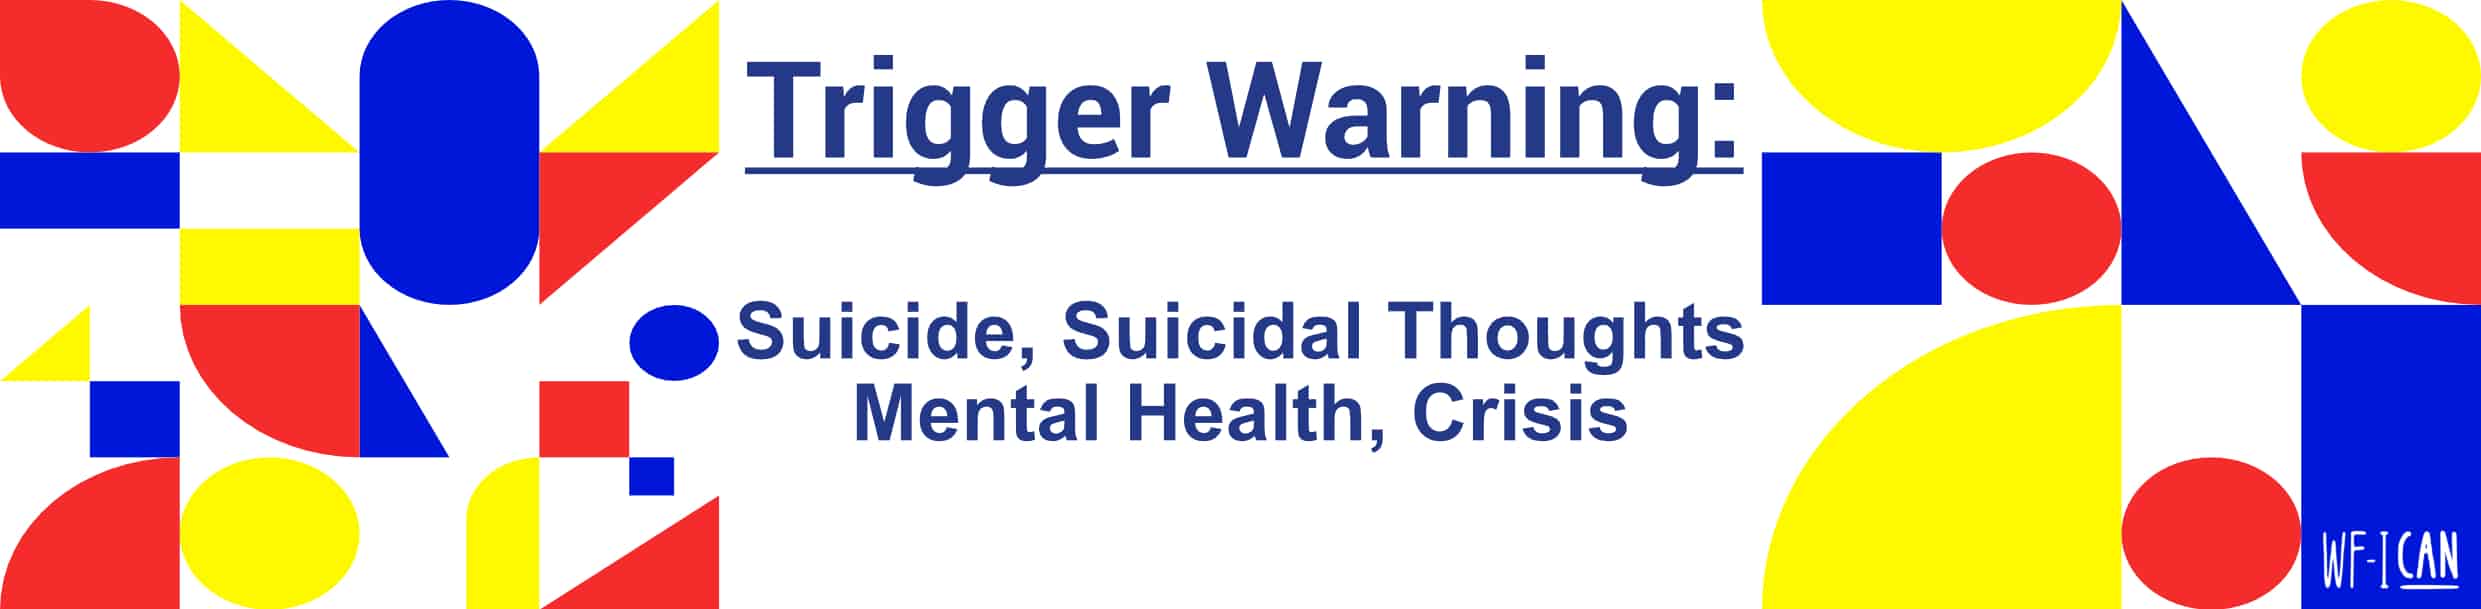 wfican trigger warning suicide